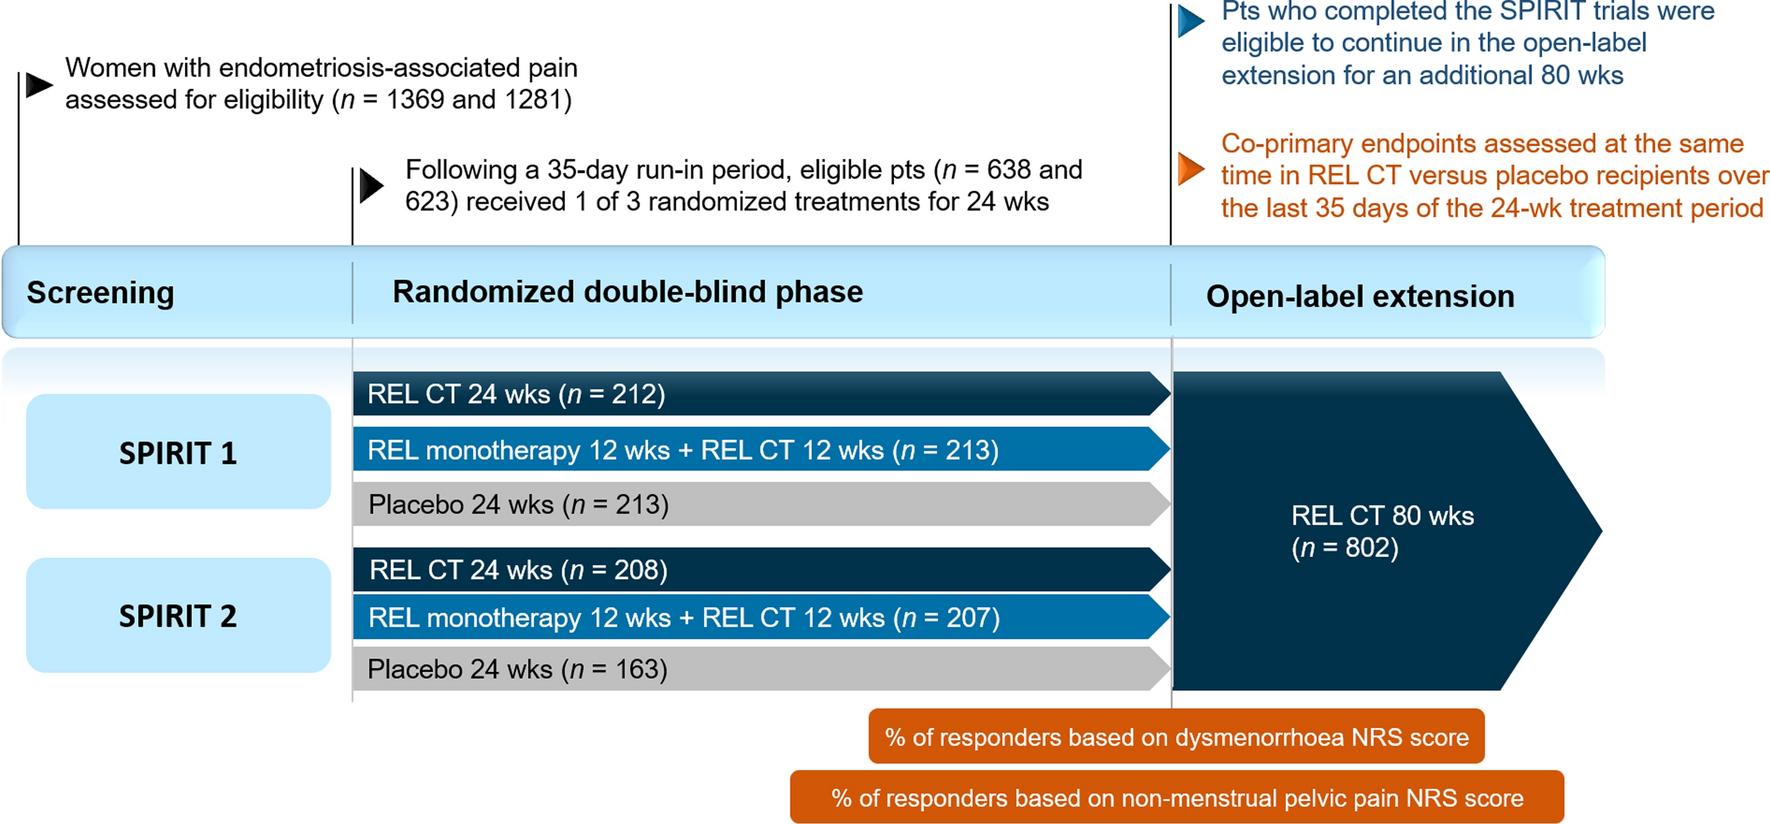 Relugolix/Estradiol/Norethisterone Acetate: A Review in Endometriosis-Associated Pain